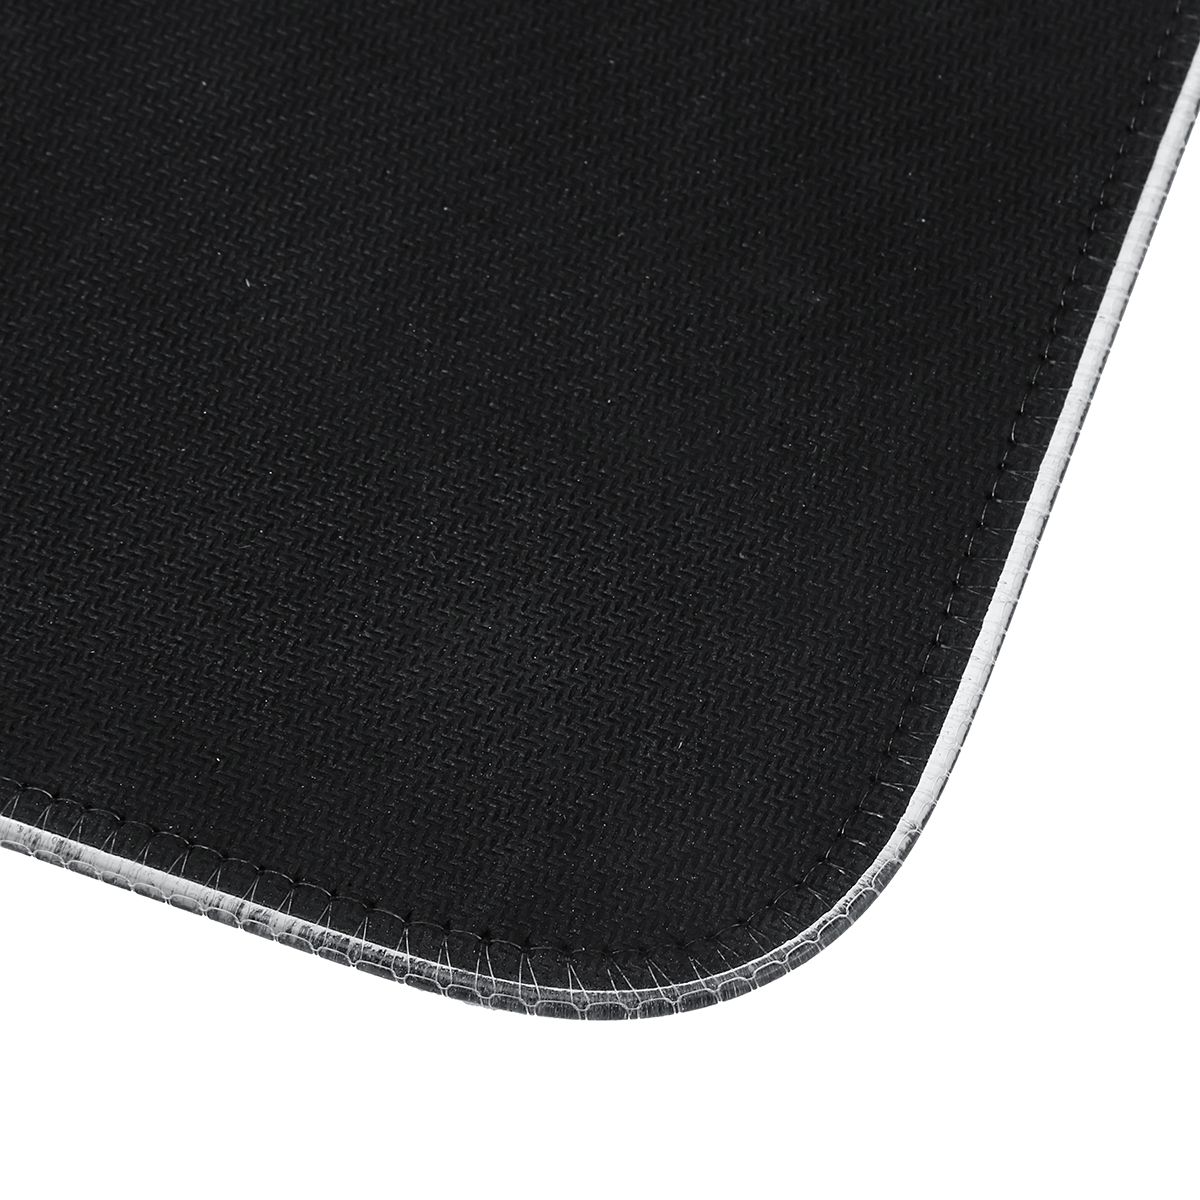 RGB-Mouse-Pad-Anti-slip-Rubber-Soft-Cloth-Desktop-Mouse-Keyboard-Mat-for-Home-Gaming-Office-Work-1740447